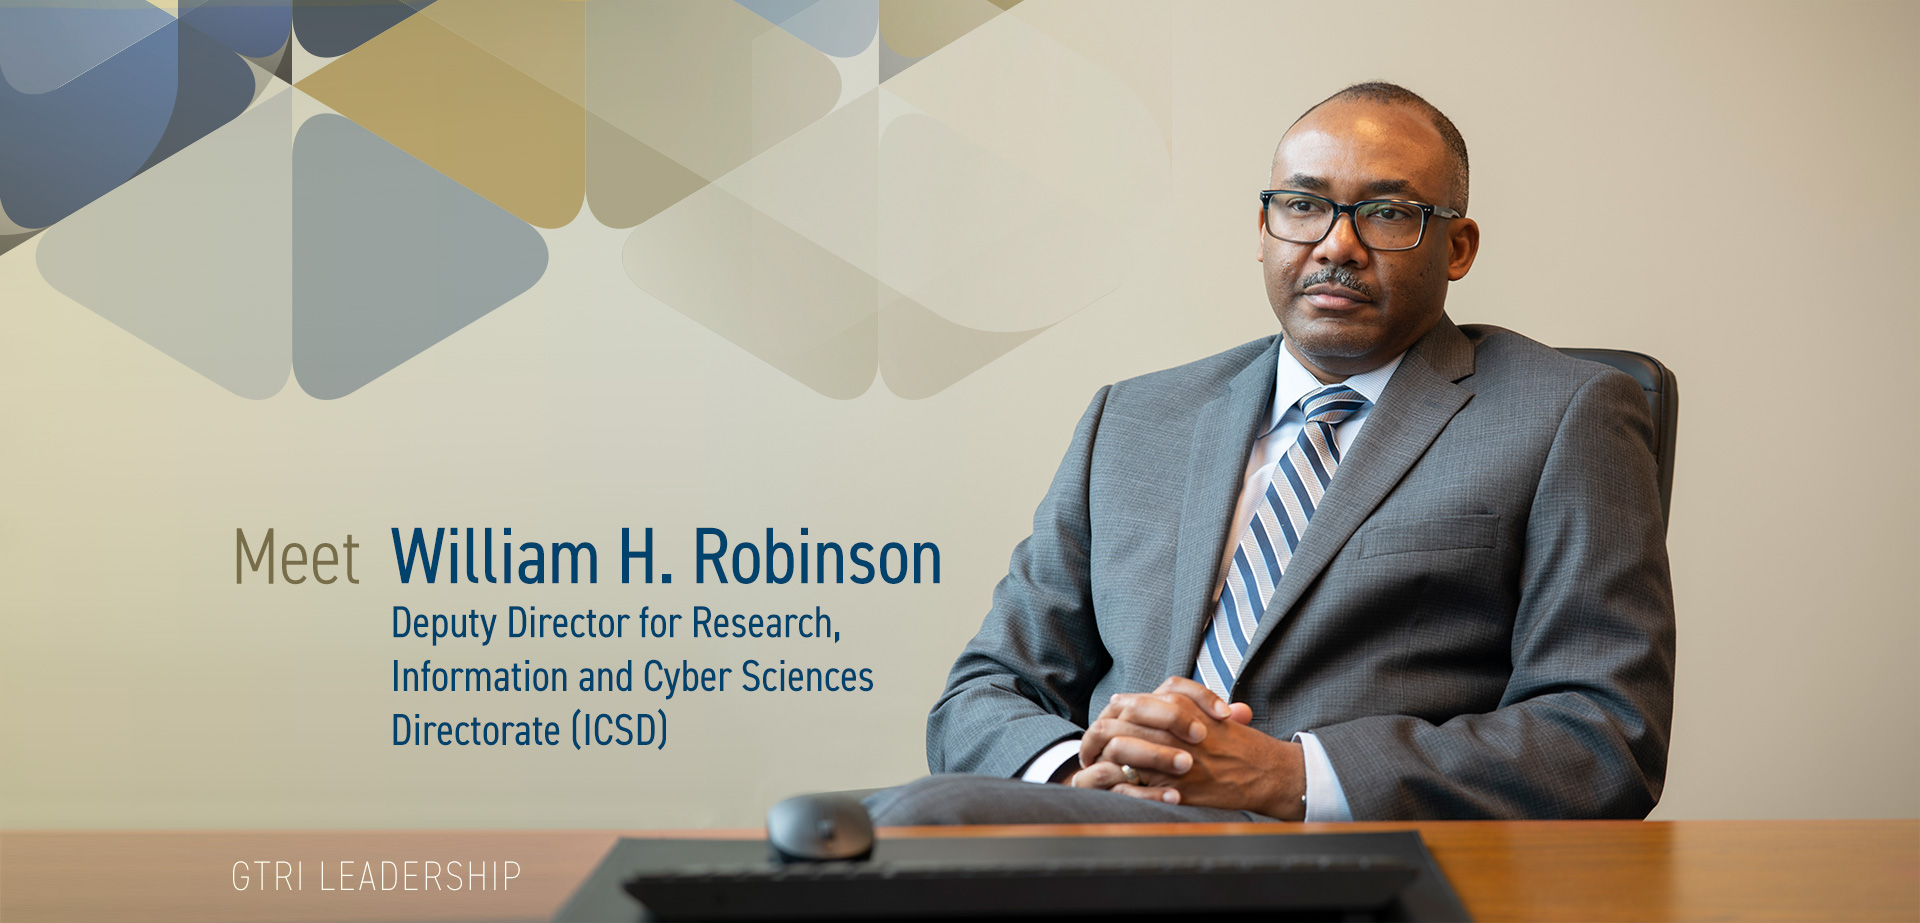 Photo of William H. Robinson sitting behind desk with text that reads: Meet William H. Robinson  Deputy Director for Research for  Information and Cyber Sciences  Directorate (ICSD)